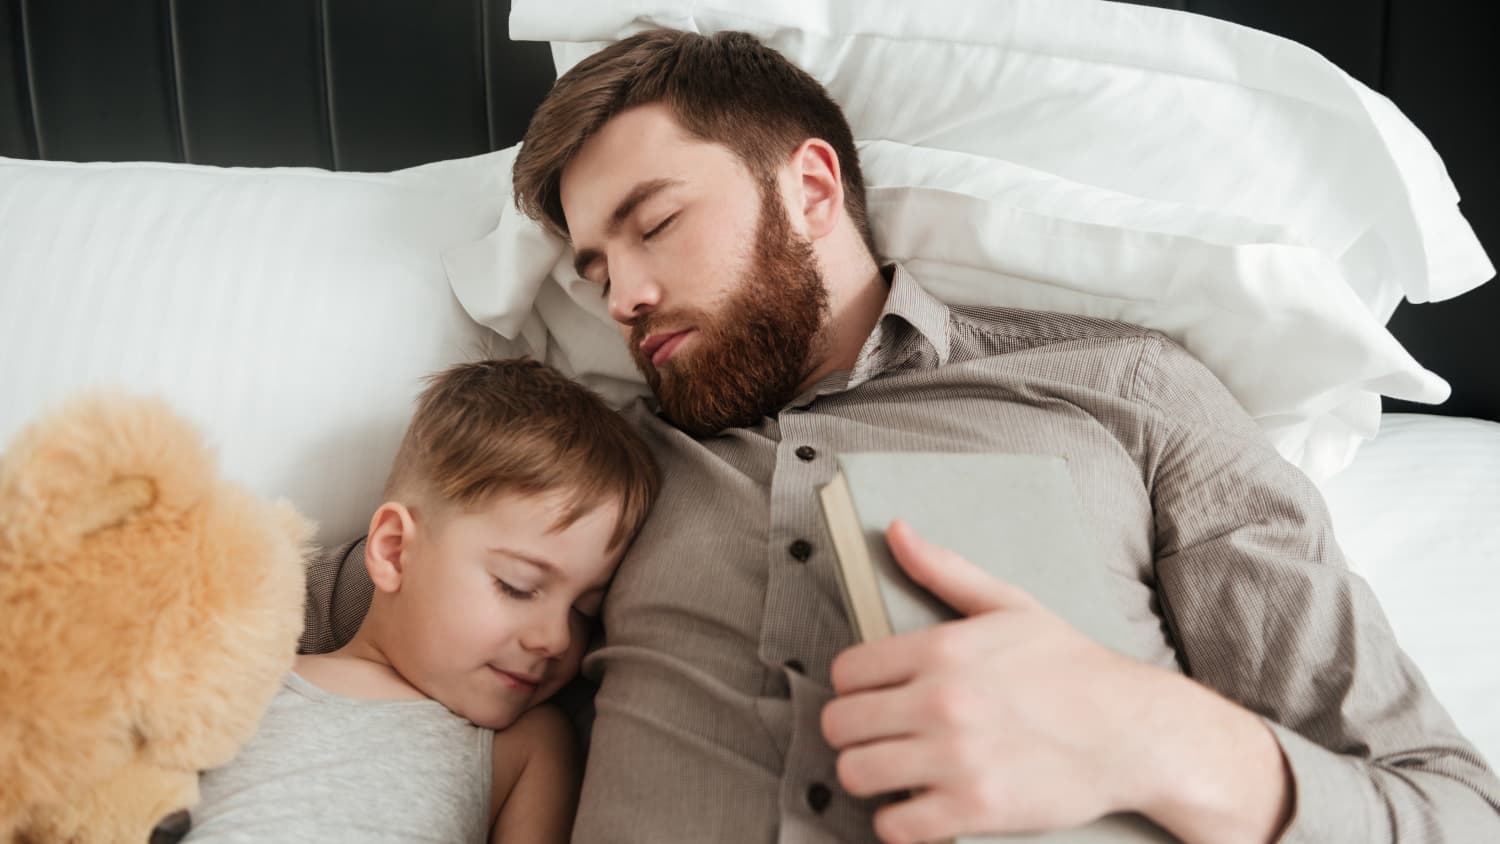 image-of-boy-sleeping-at-home-in-bed-near-toy-with-his-bearded-father-holding-book-SBI-302832596